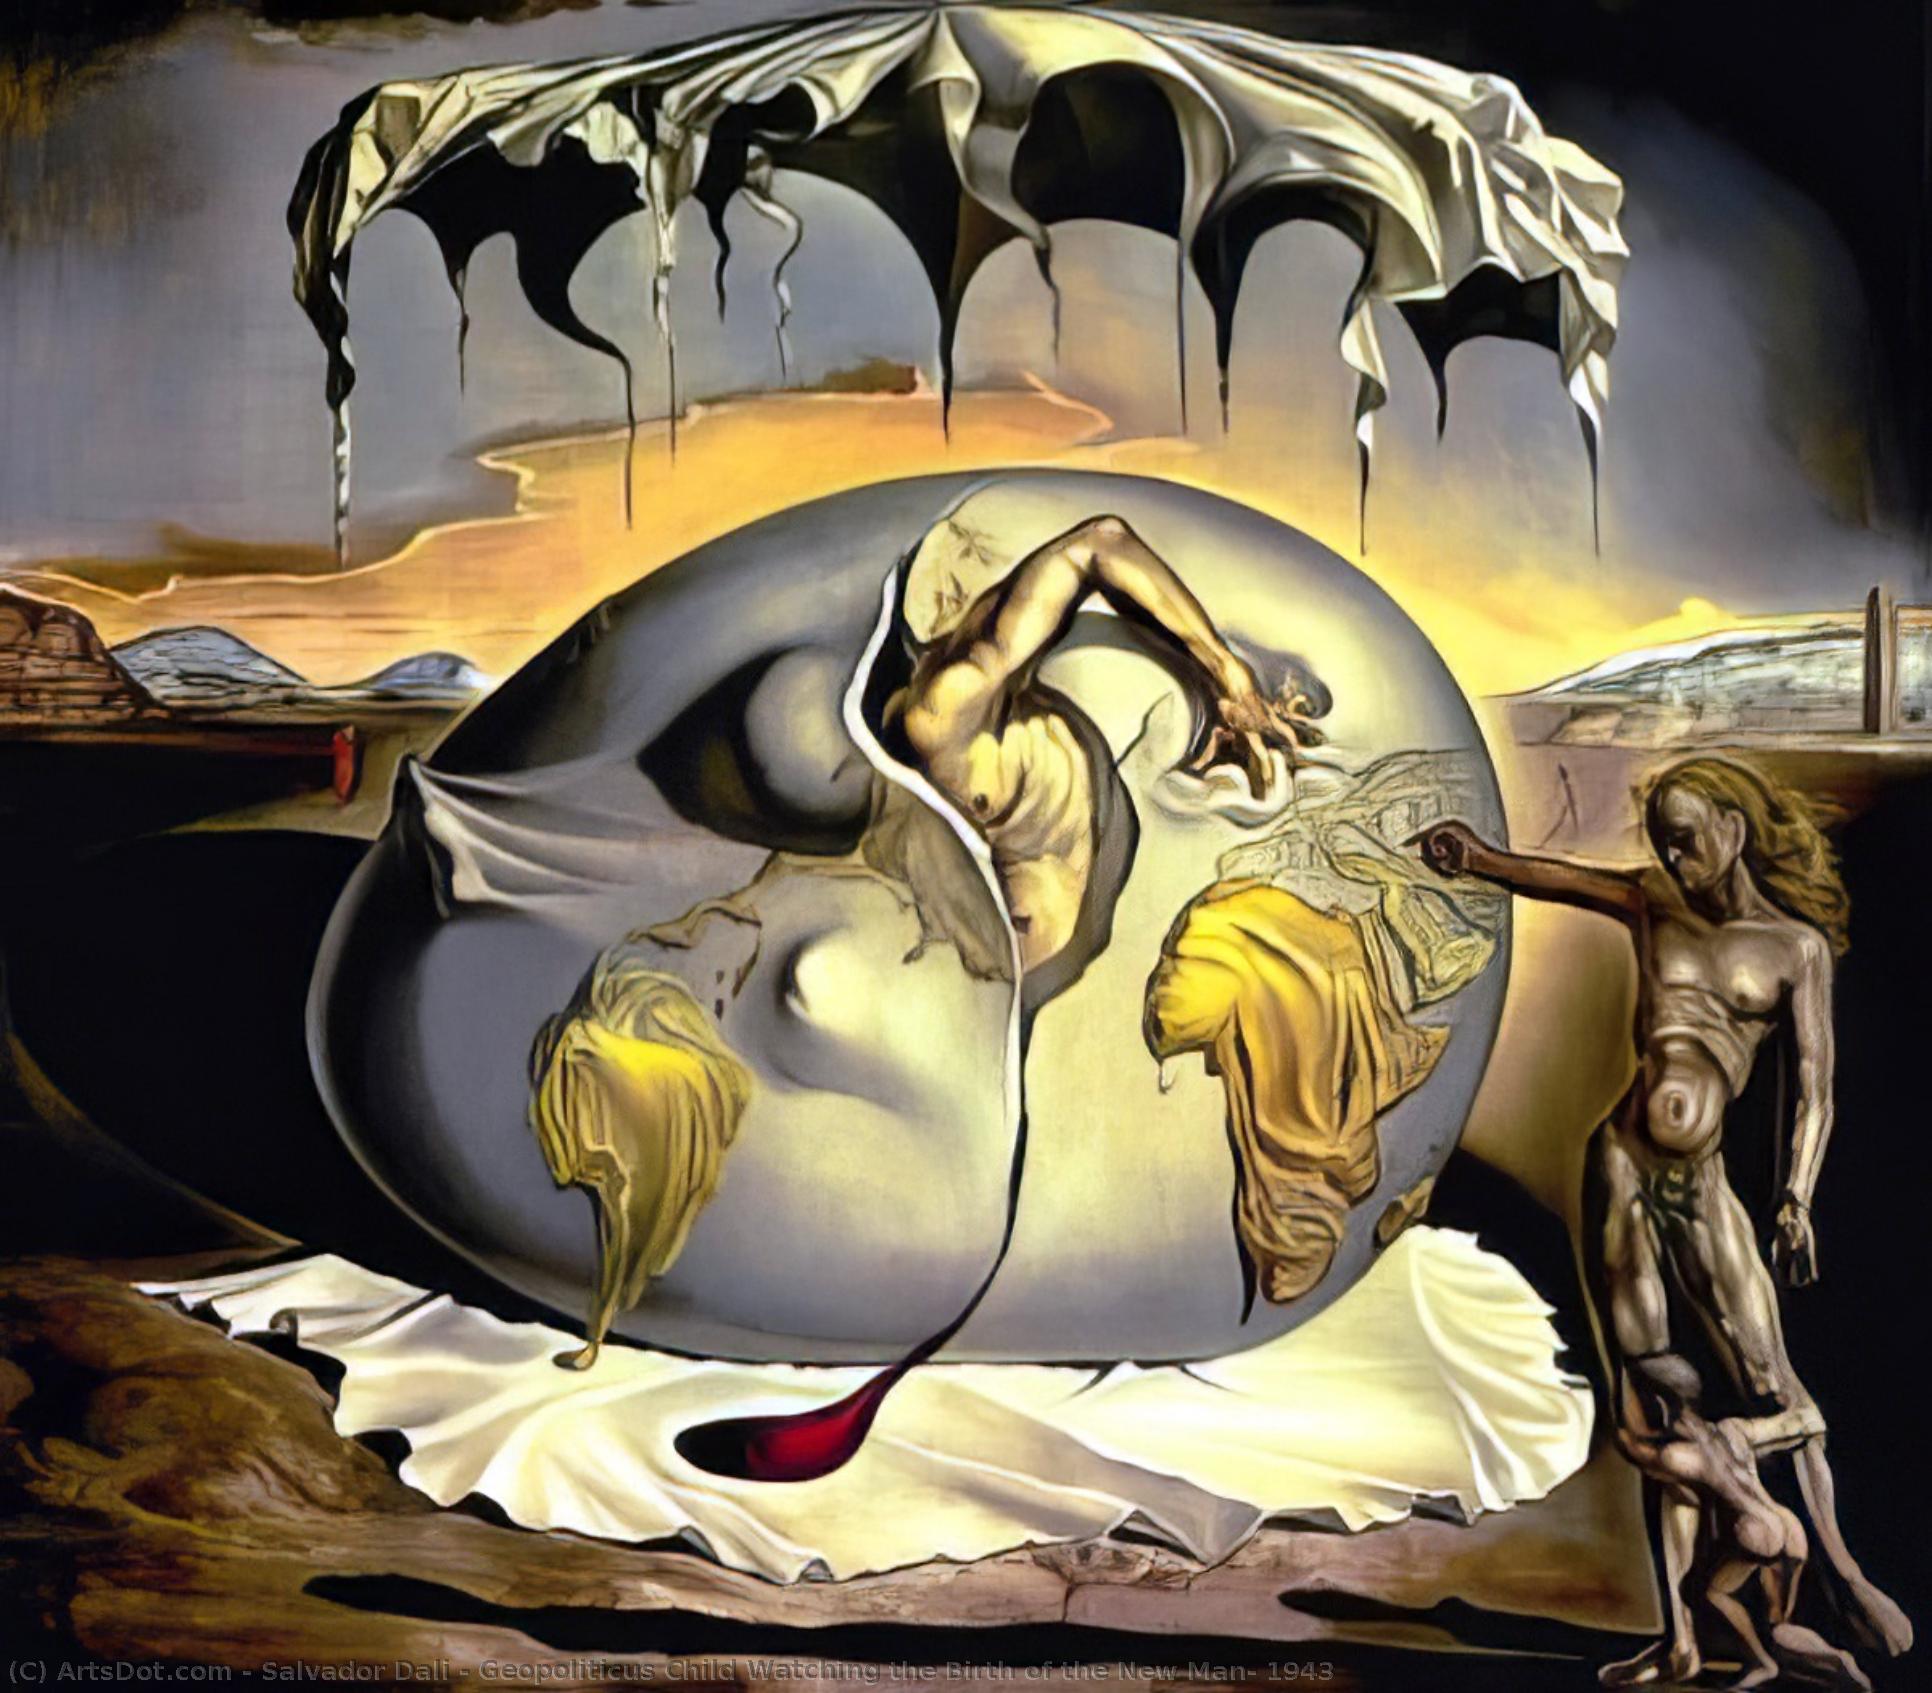 WikiOO.org - Encyclopedia of Fine Arts - Malba, Artwork Salvador Dali - Geopoliticus Child Watching the Birth of the New Man, 1943